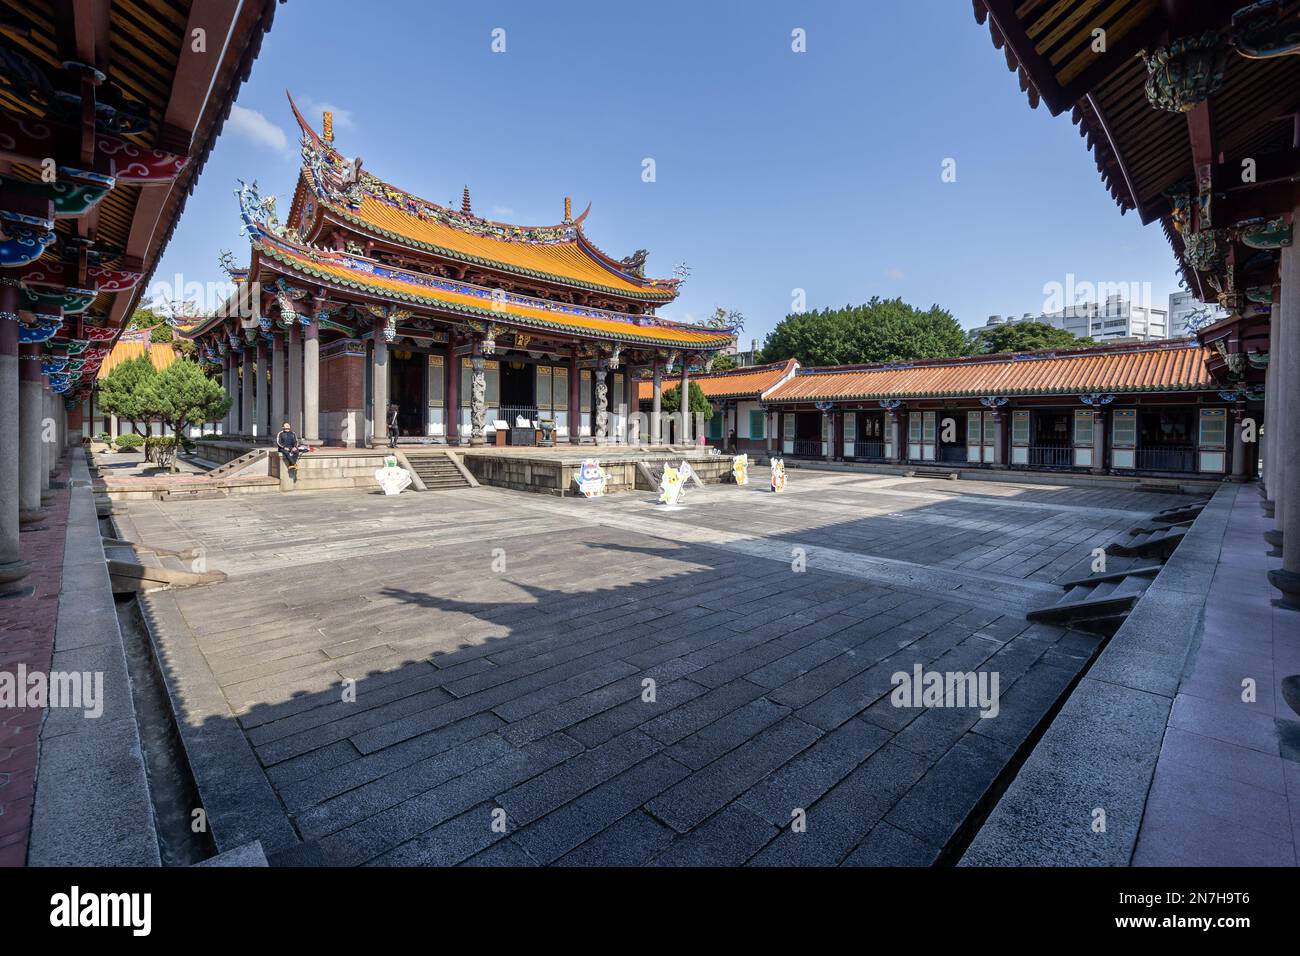 The main temple building at the Confucius Temple in Taipei, Taiwan. Stock Photo